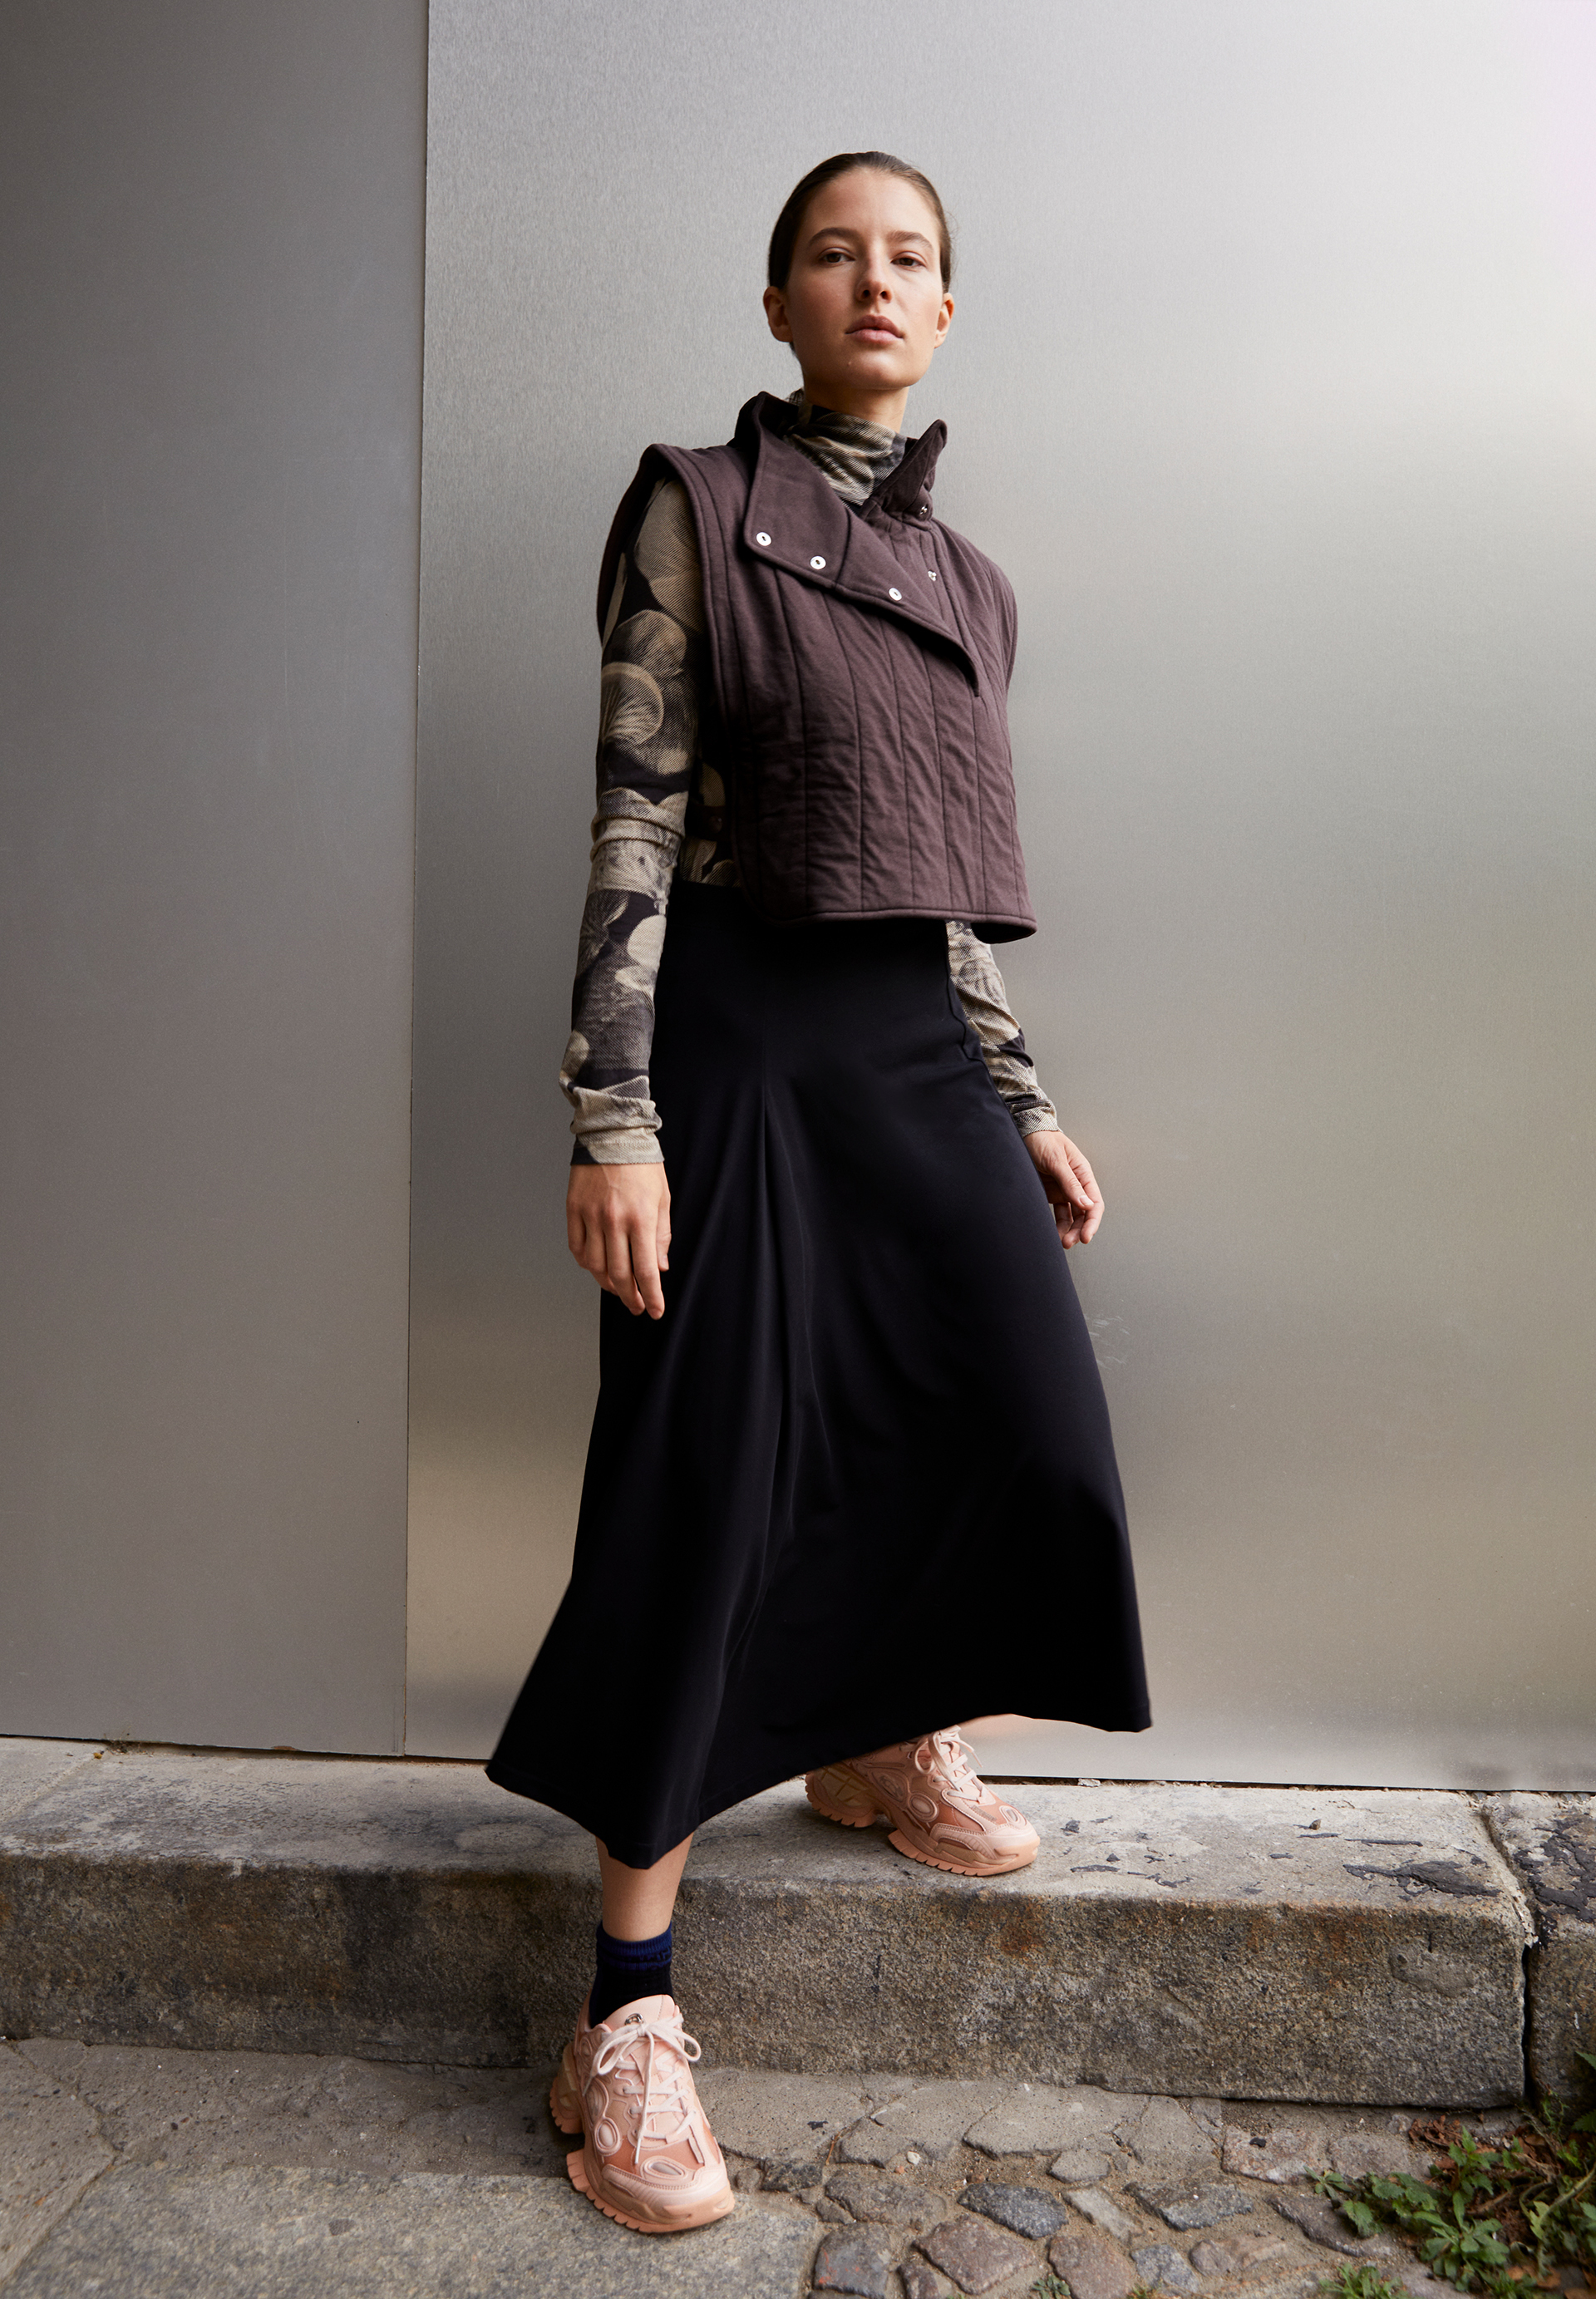 AVAA LOU Jersey Skirt Relaxed Fit made of Organic Cotton Mix